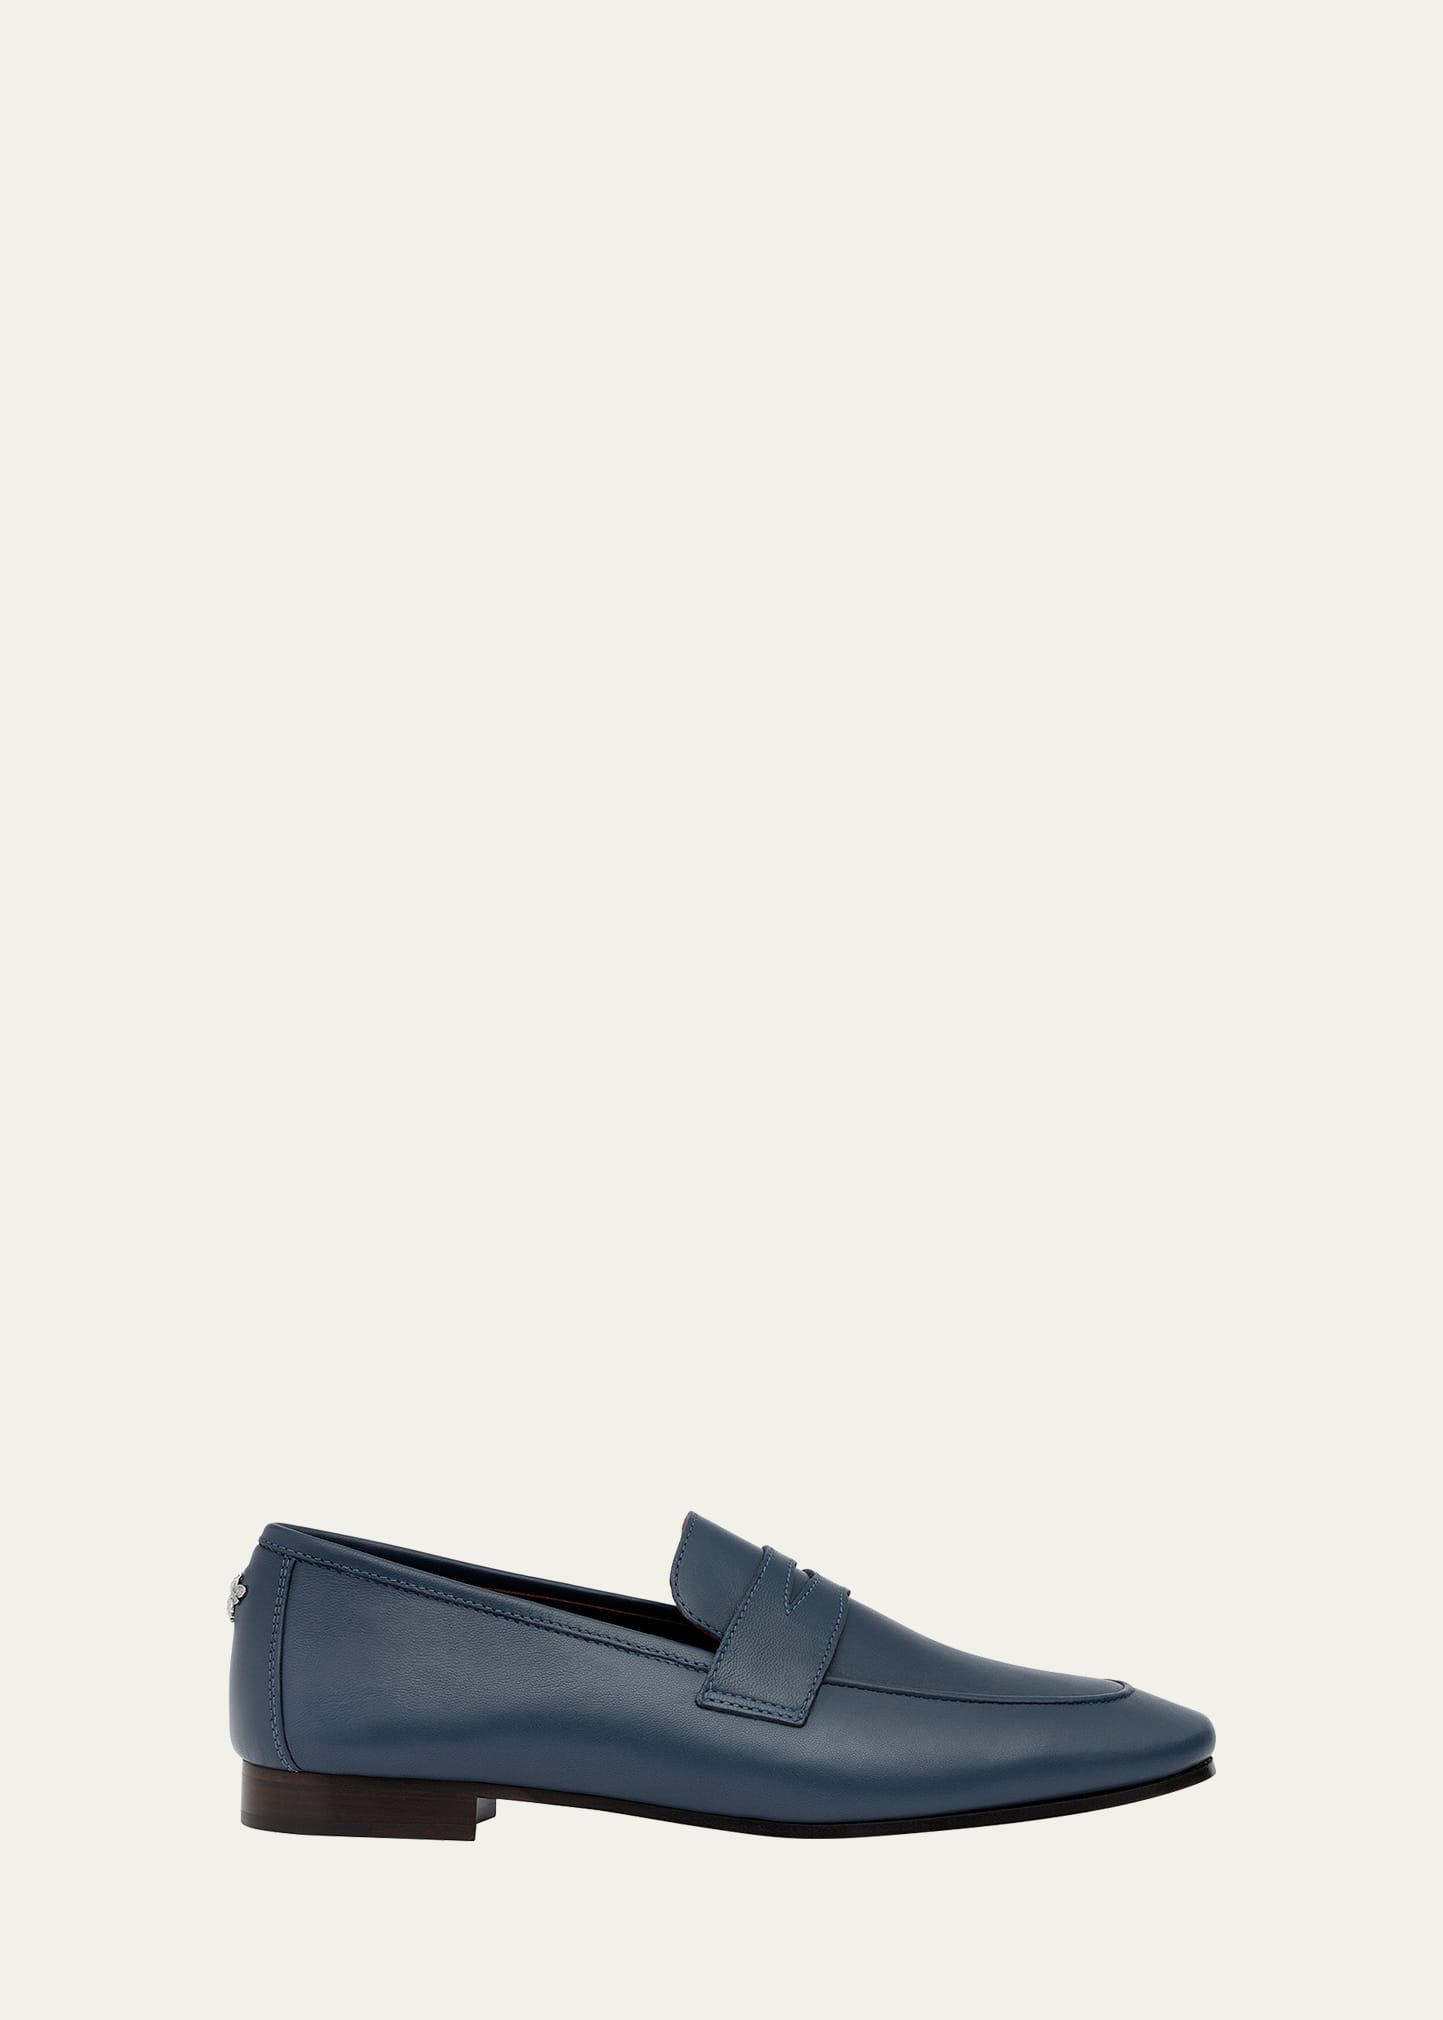 Bougeotte Flaneur Lambskin Penny Loafers